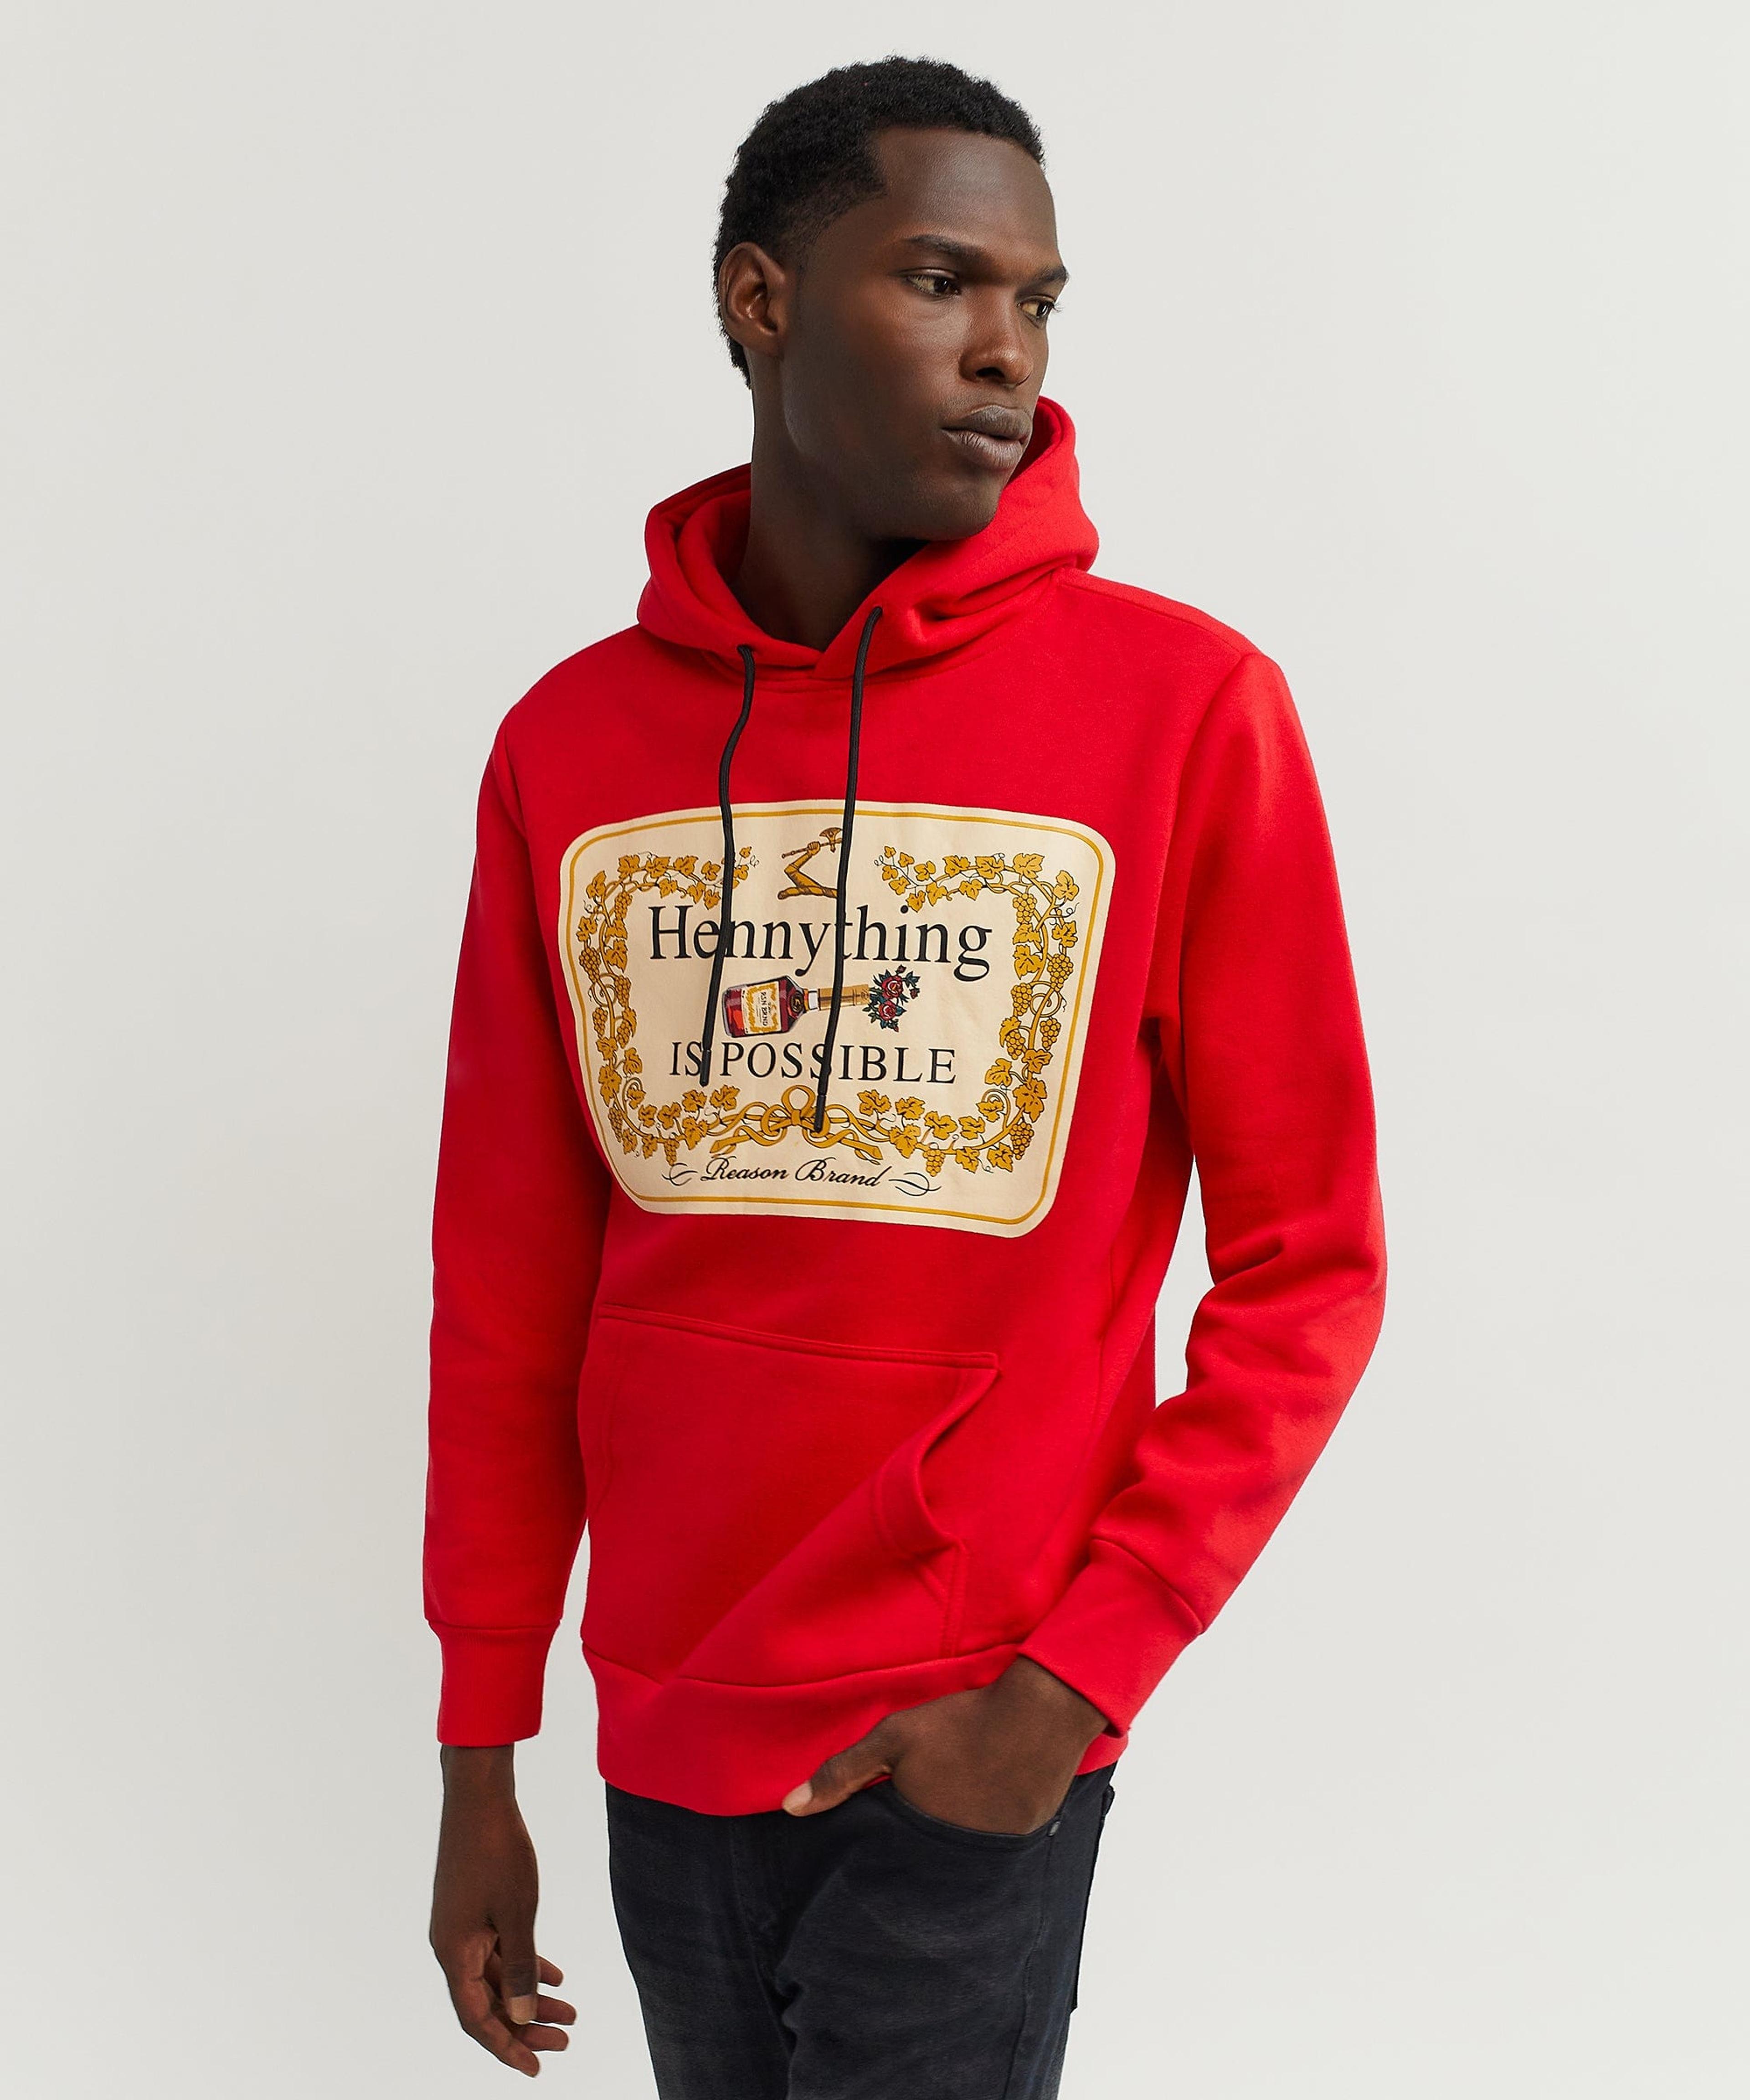 Hennything Is Possible Hoodie - Red